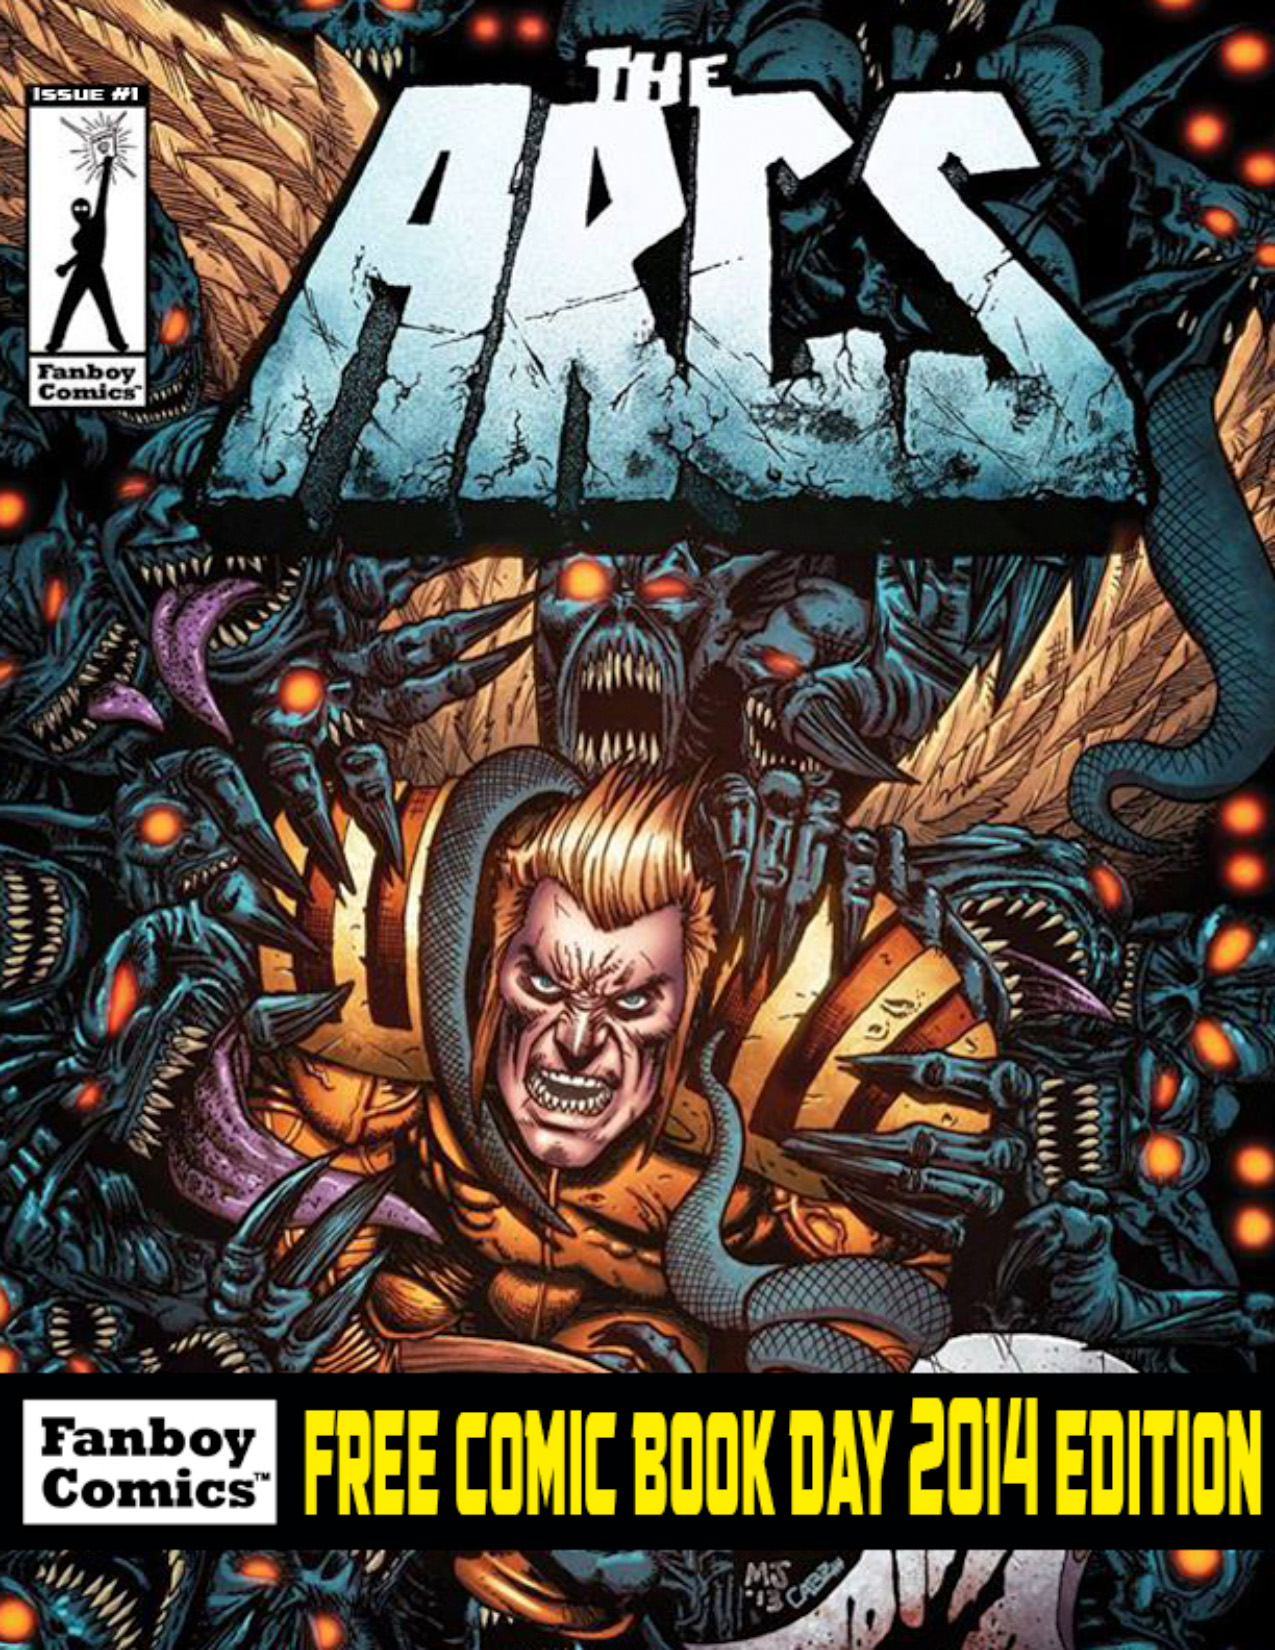 Read online Free Comic Book Day 2014 comic -  Issue # The Arcs 001 - FCBD Edition - 1